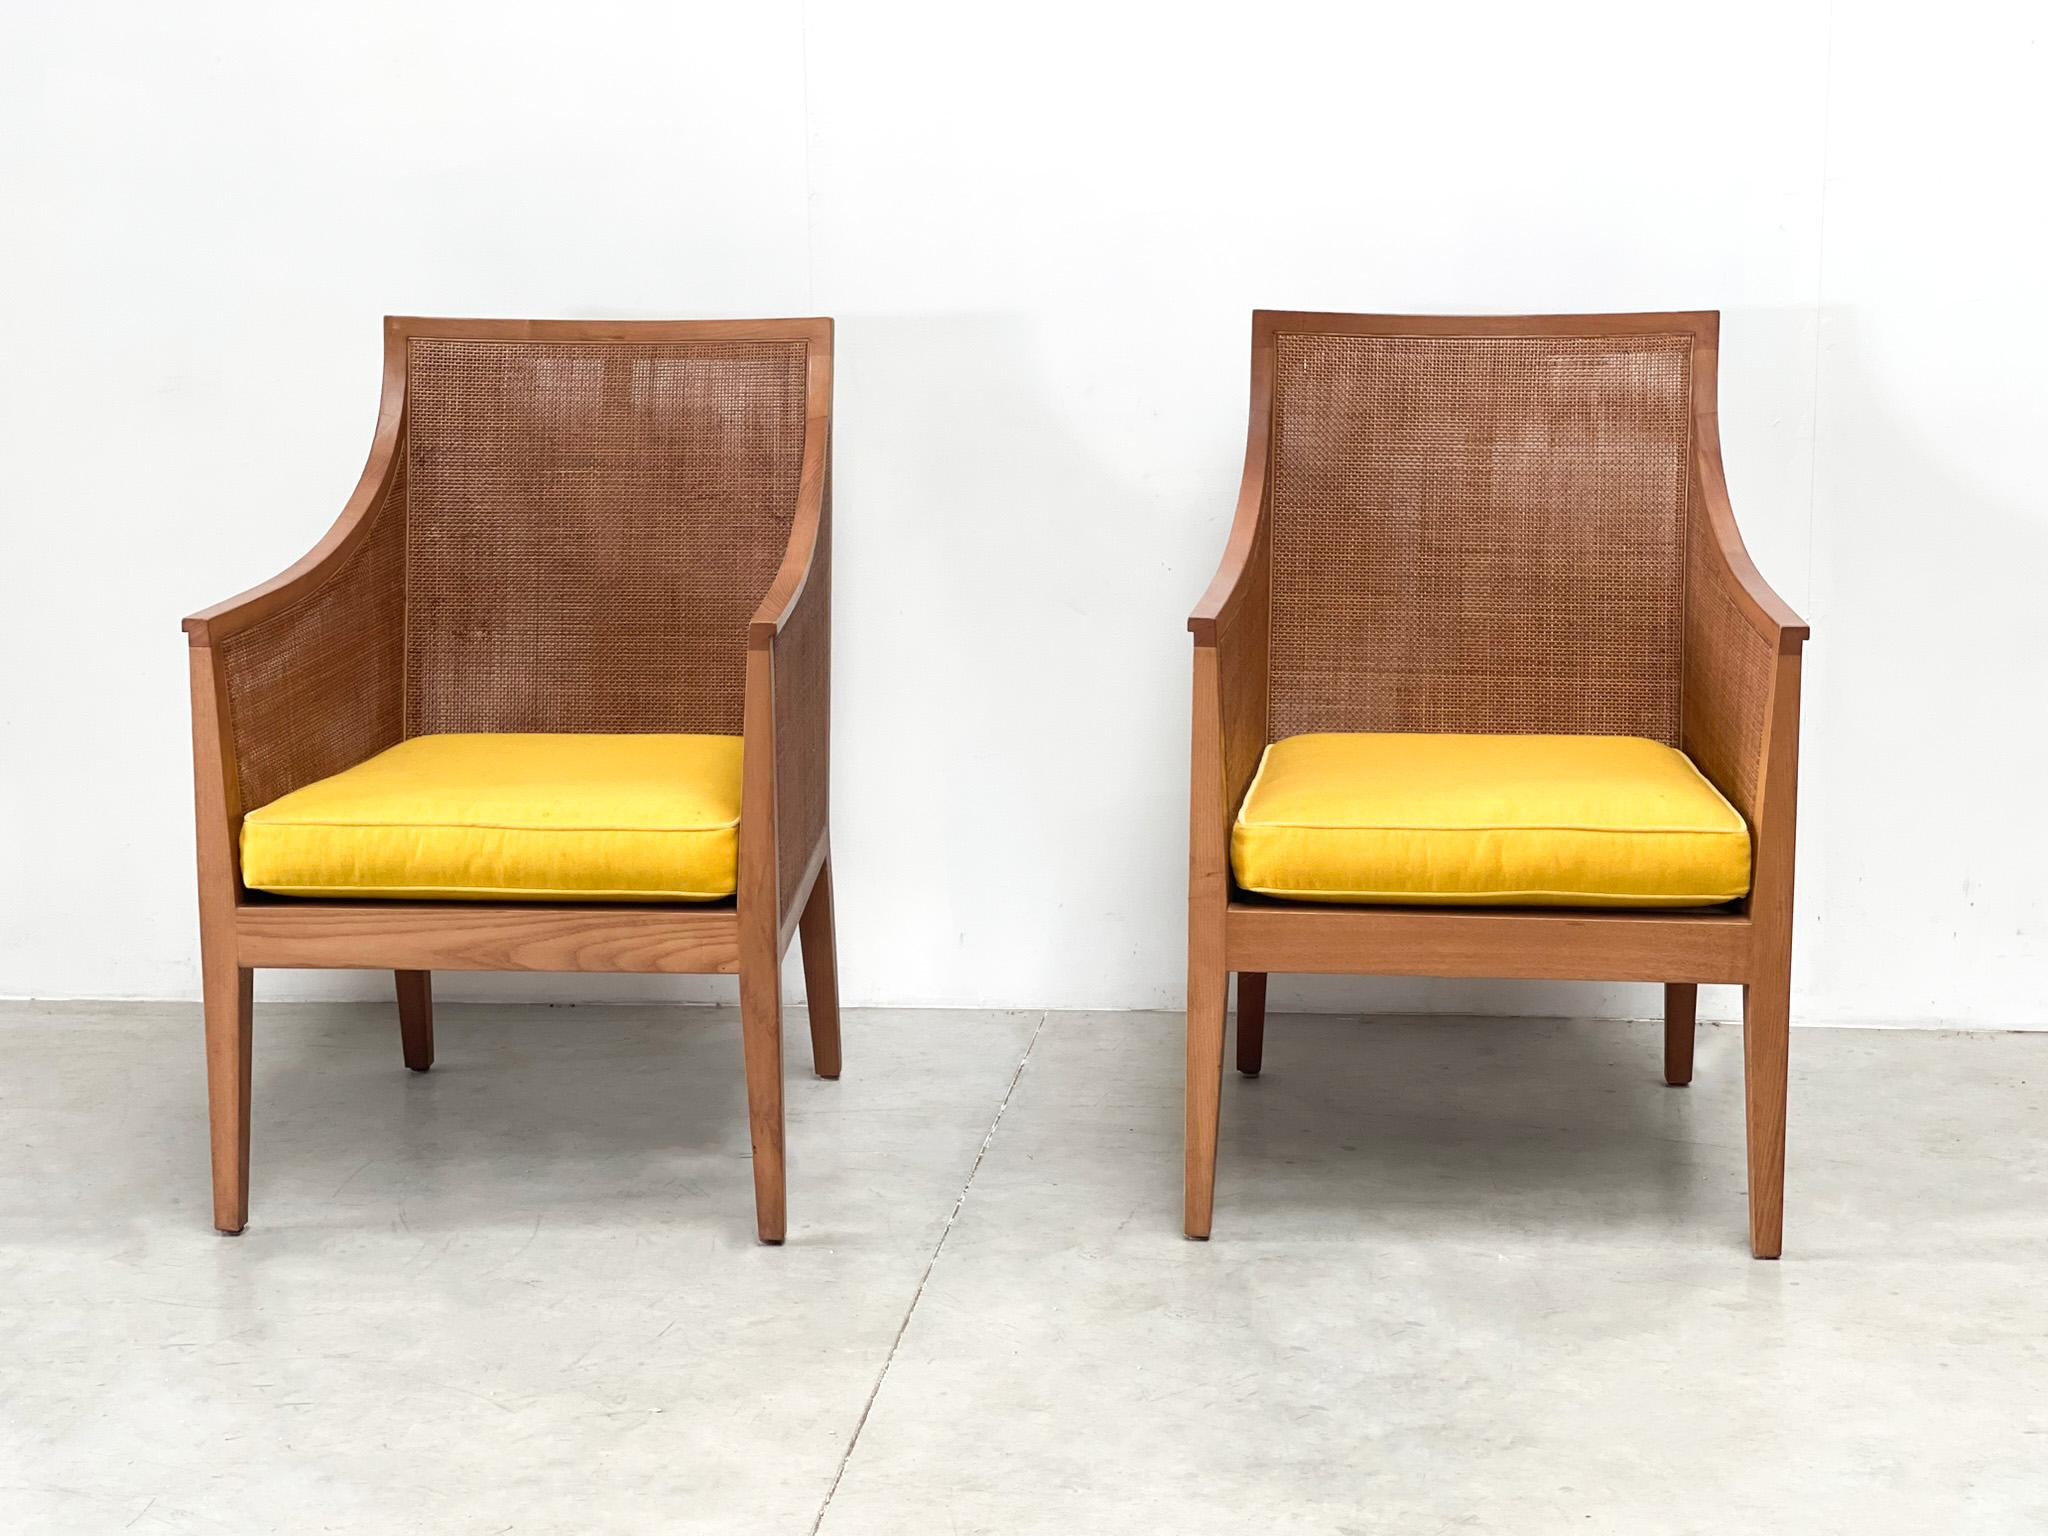 couple arm chairs from the 1970s. This top duo was designed by Antonio Citterio in the 1970s! The chairs have a contemporary look and feel. They are made of
The chairs are in very good condition. several are available if desired. The price for the